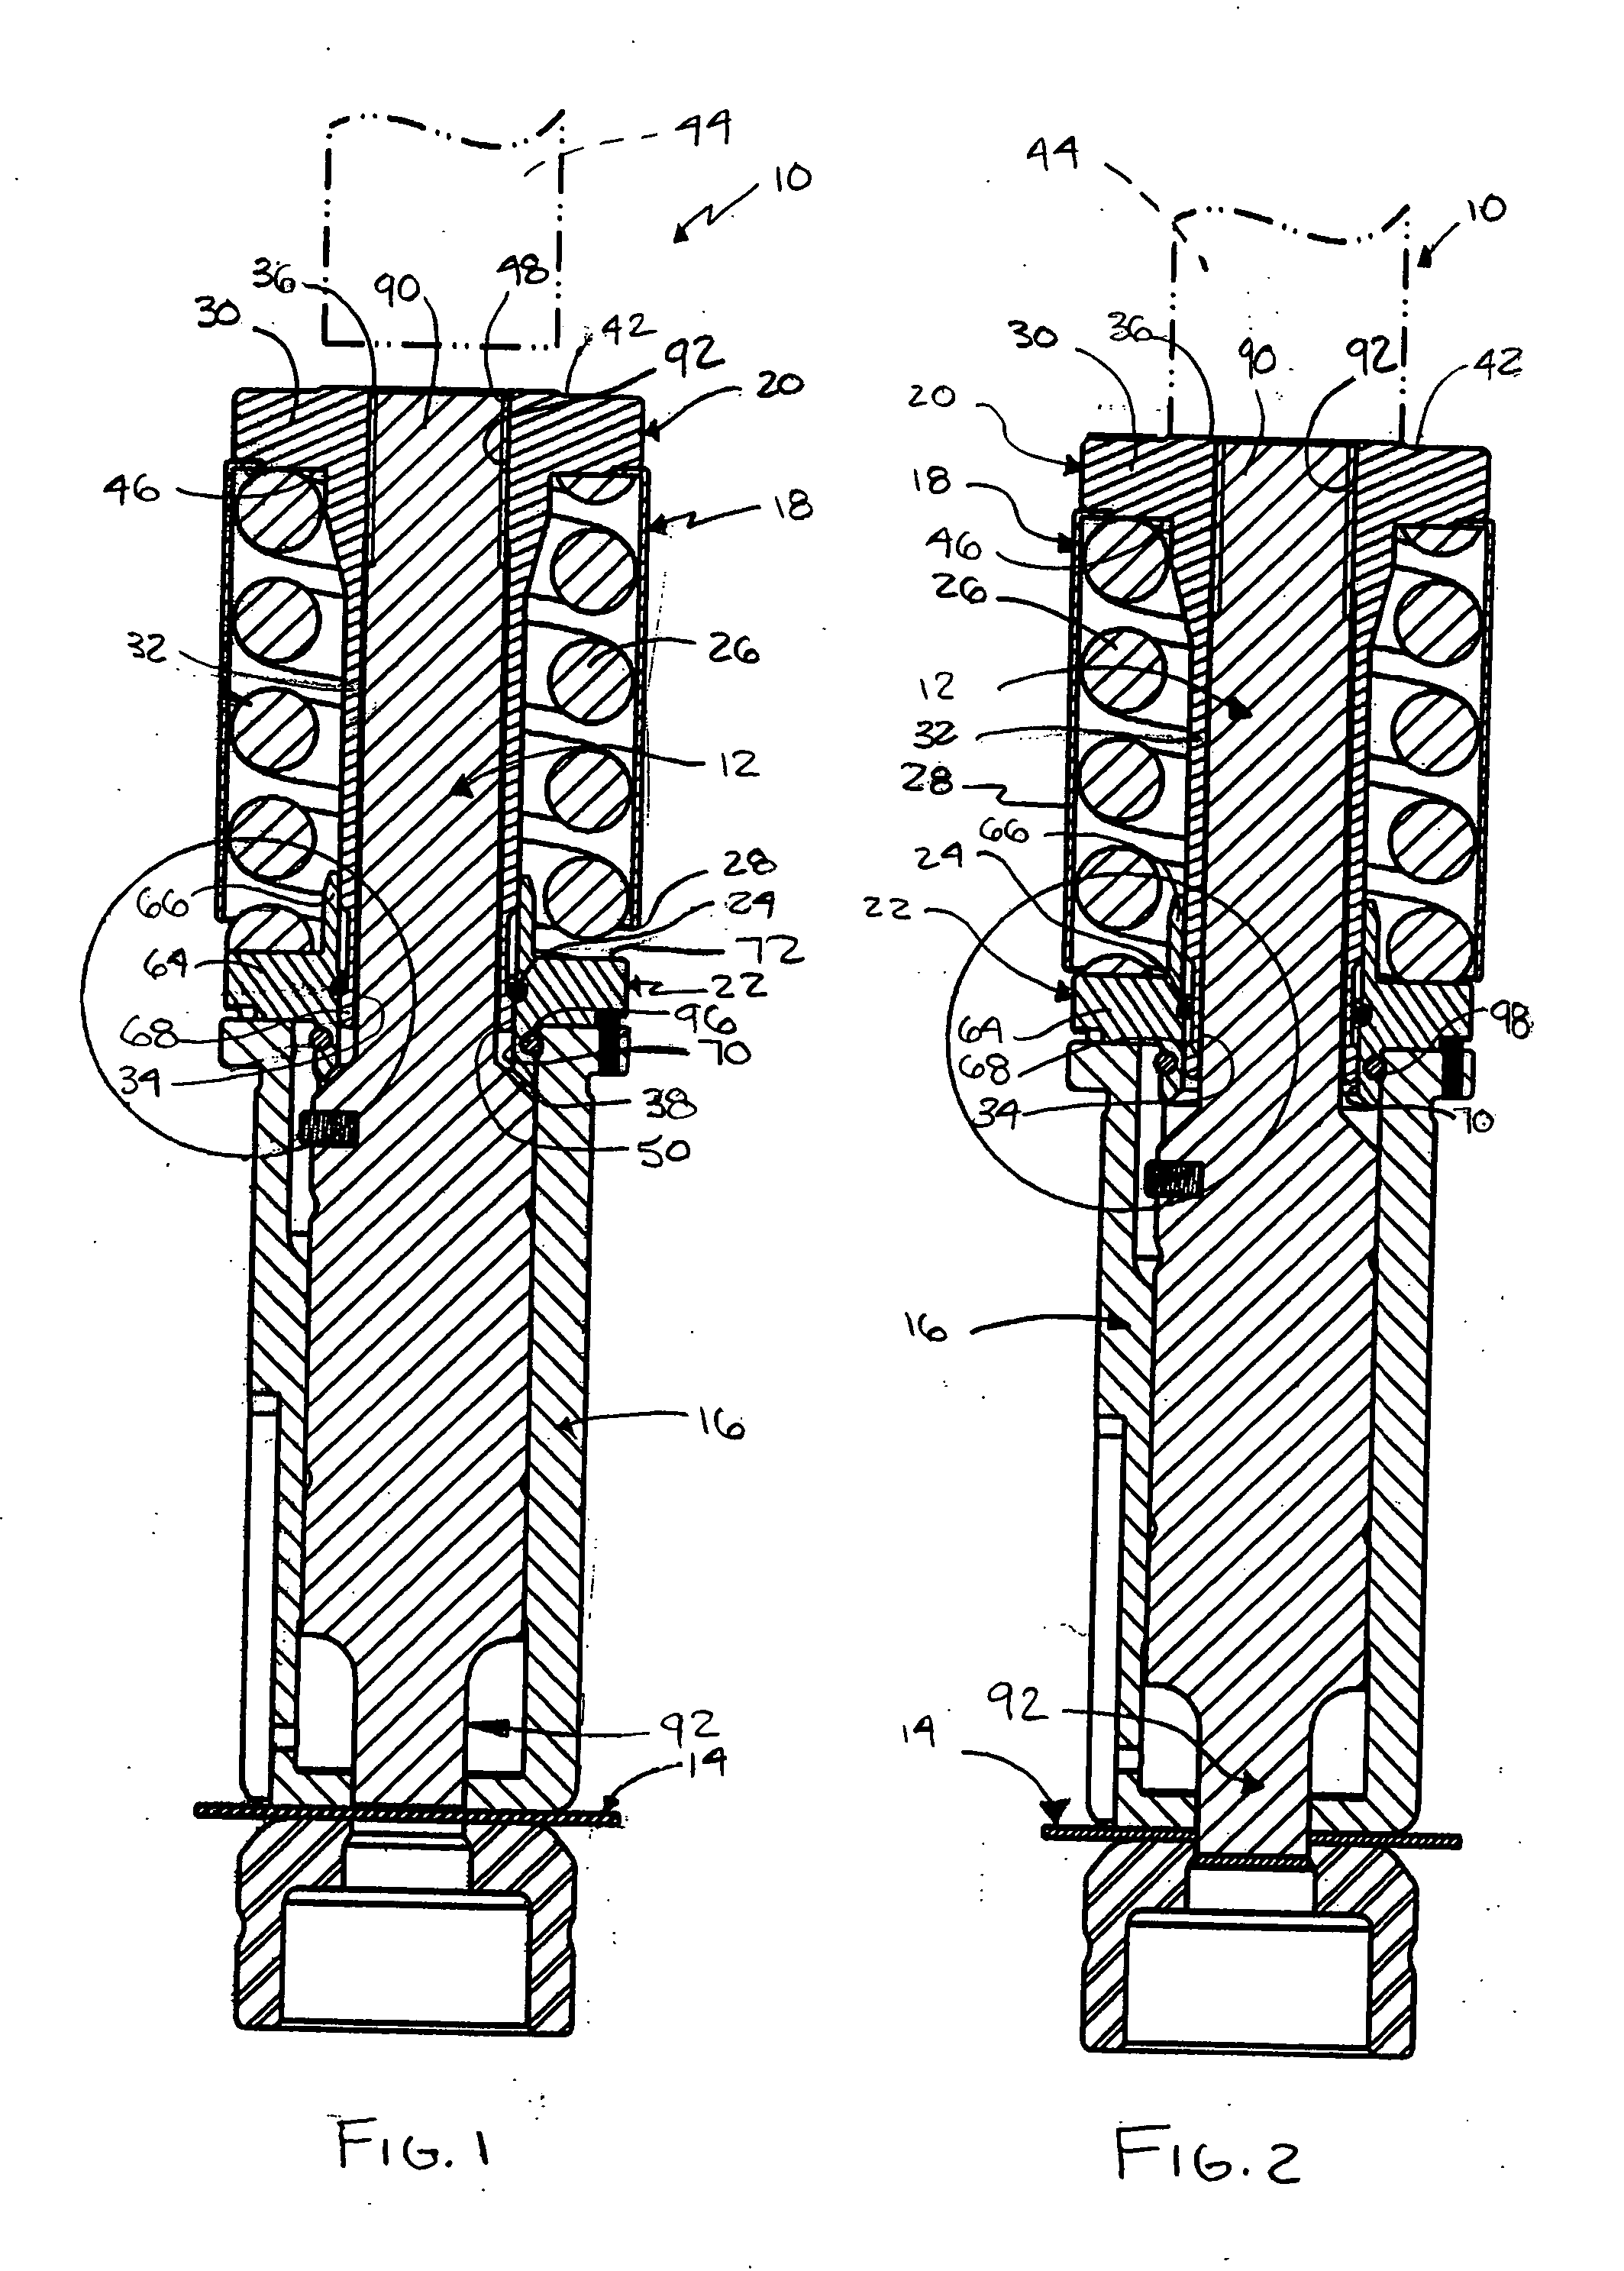 Biasing assembly for a punching device